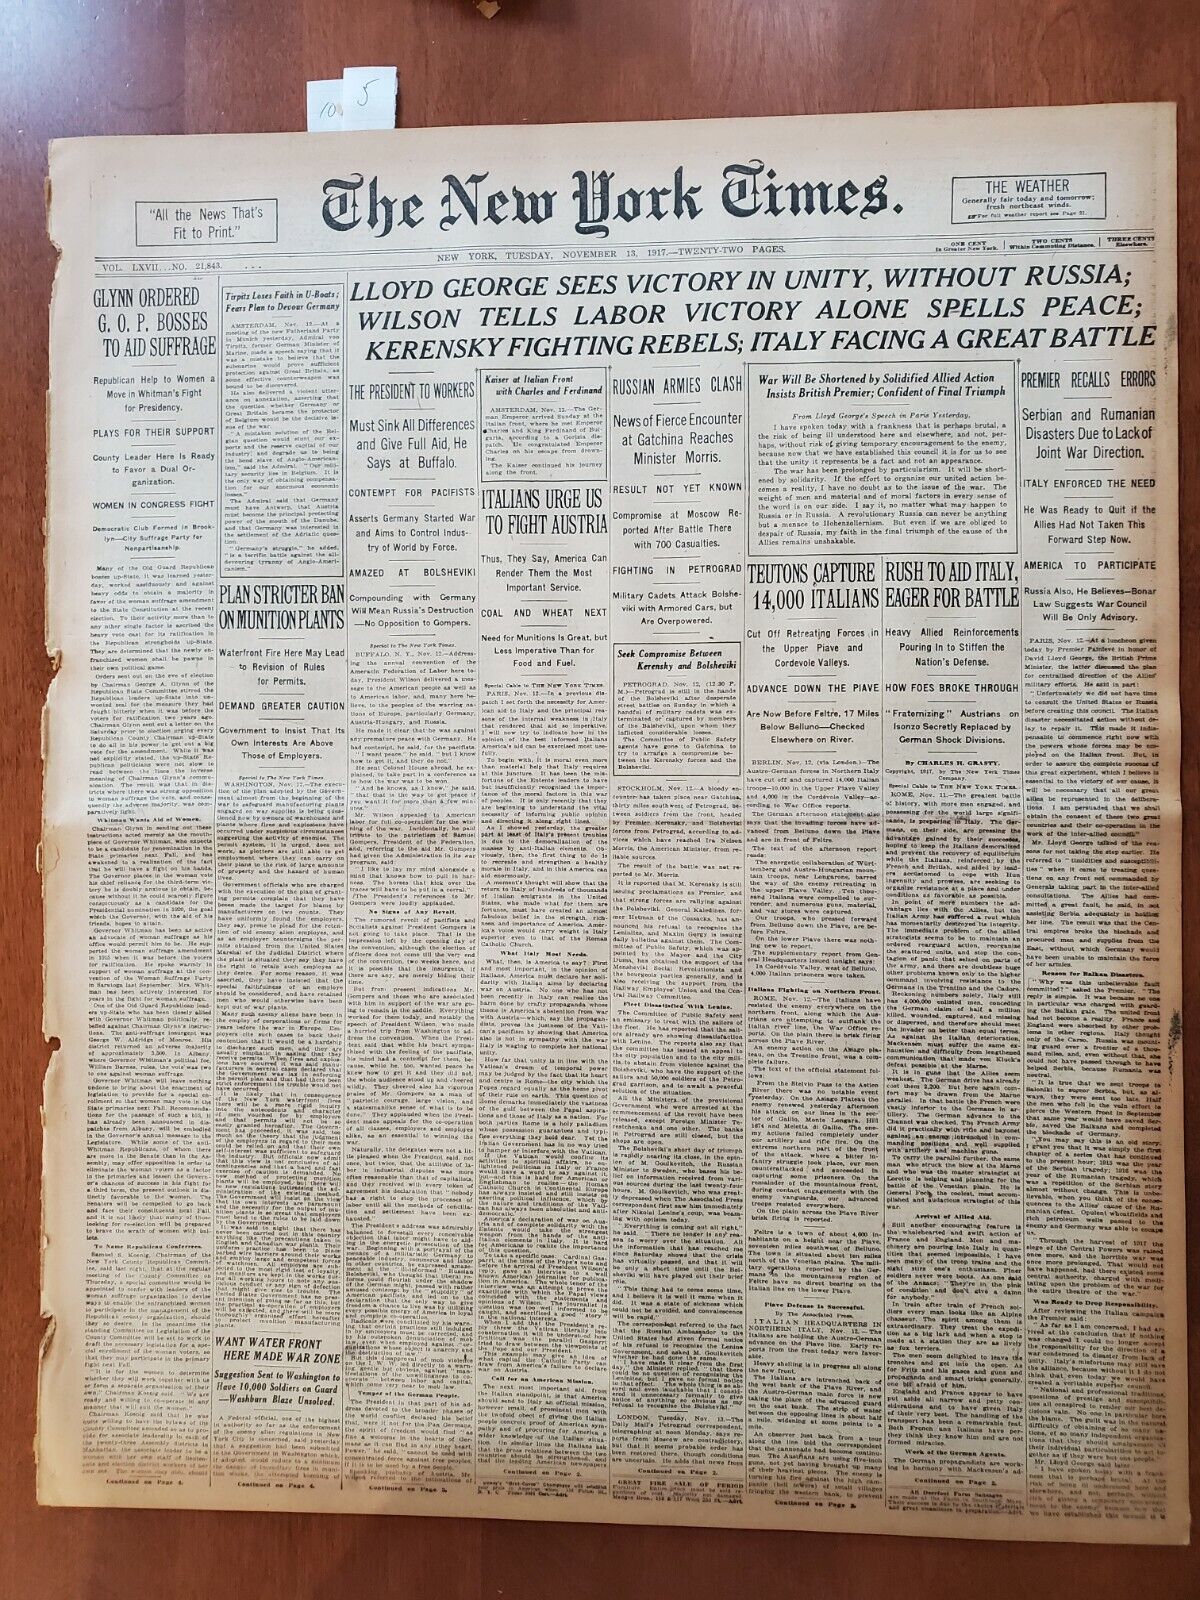 1917 NOVEMBER 13 NEW YORK TIMES - LLYOD GEORGE SEES VICTORY IN UNITY - NT 8068